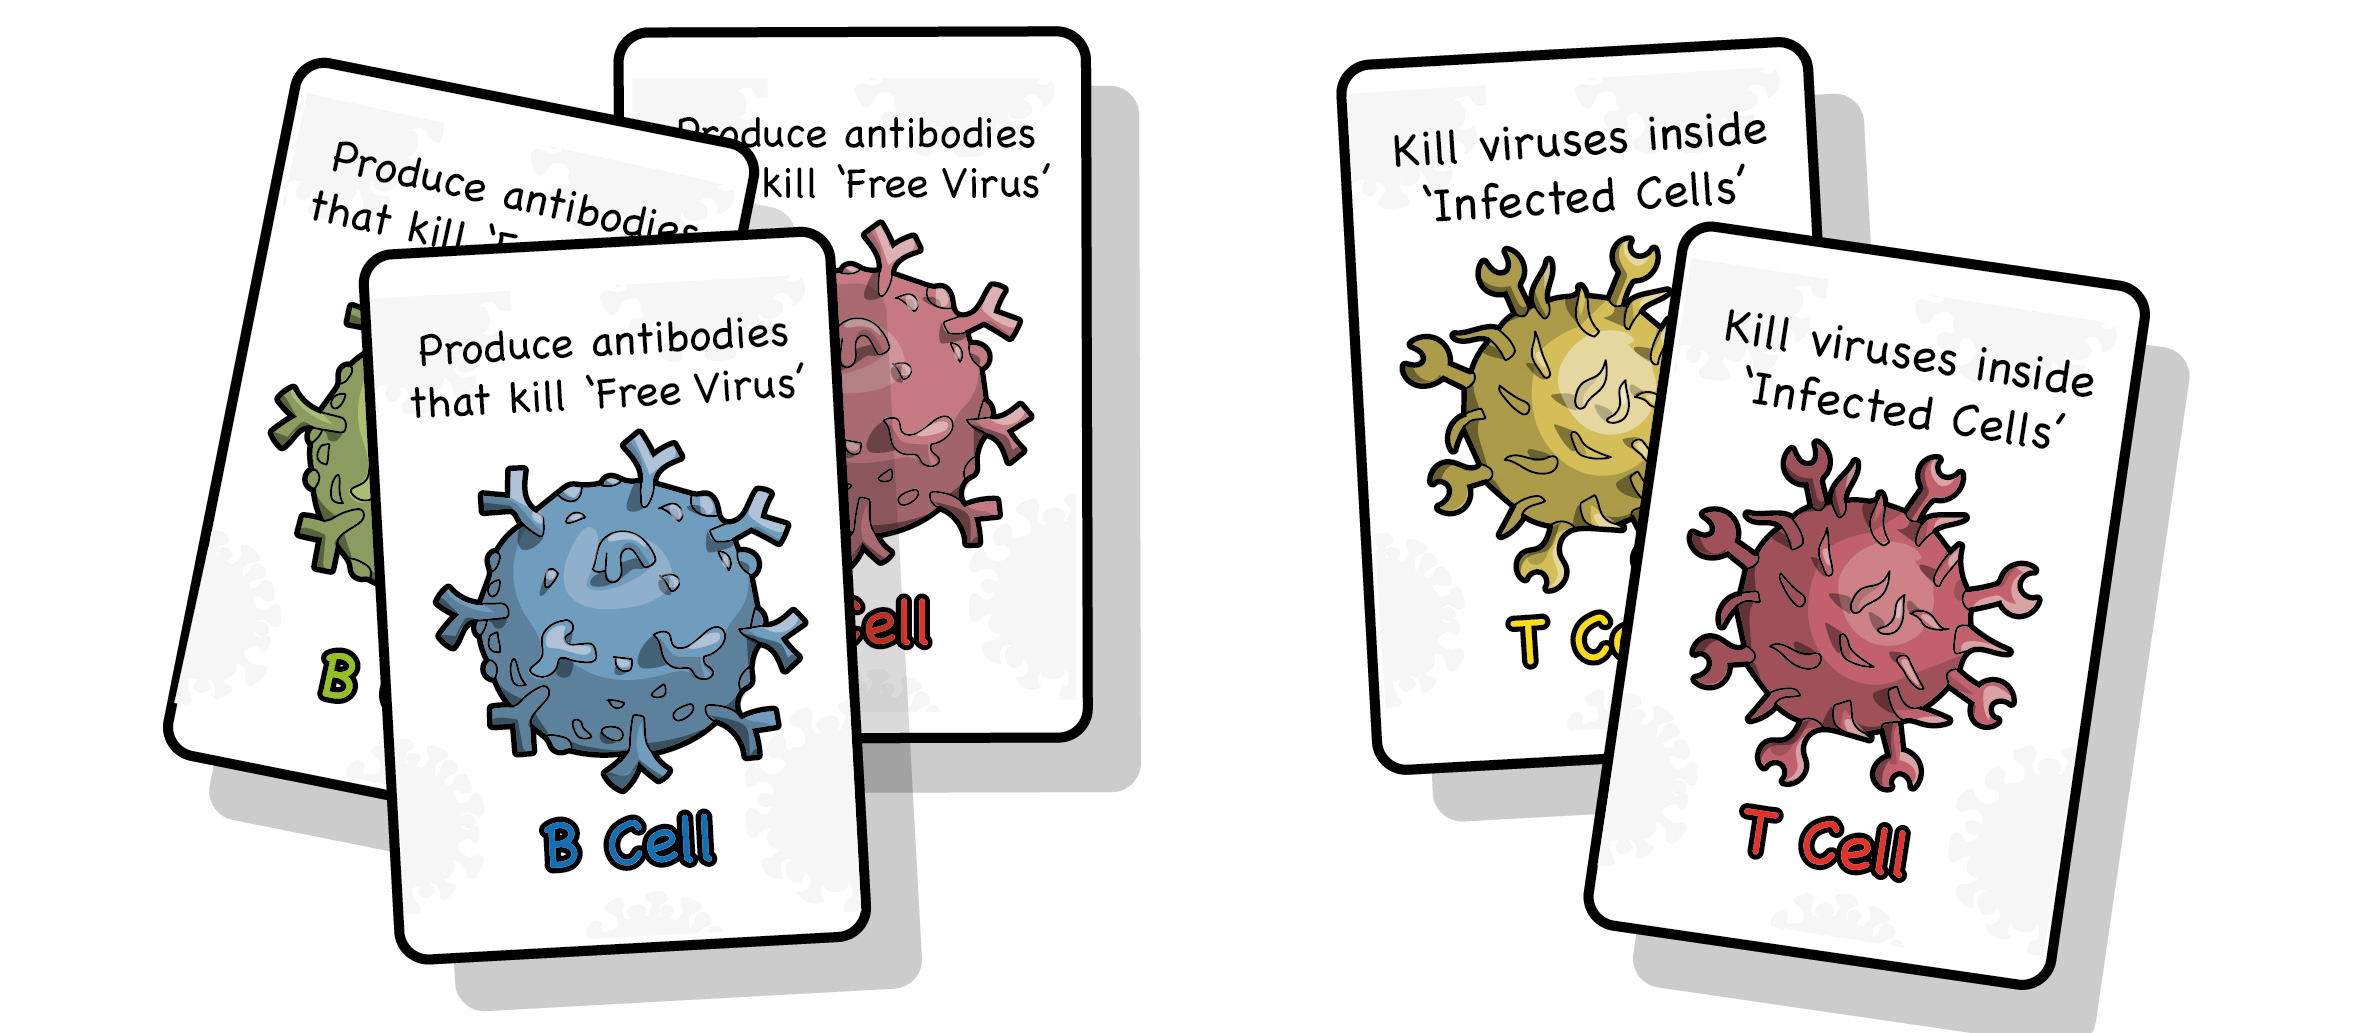 Discover eLearning and Oxford University in new project teaching children about viruses, Covid-19 and vaccinations.